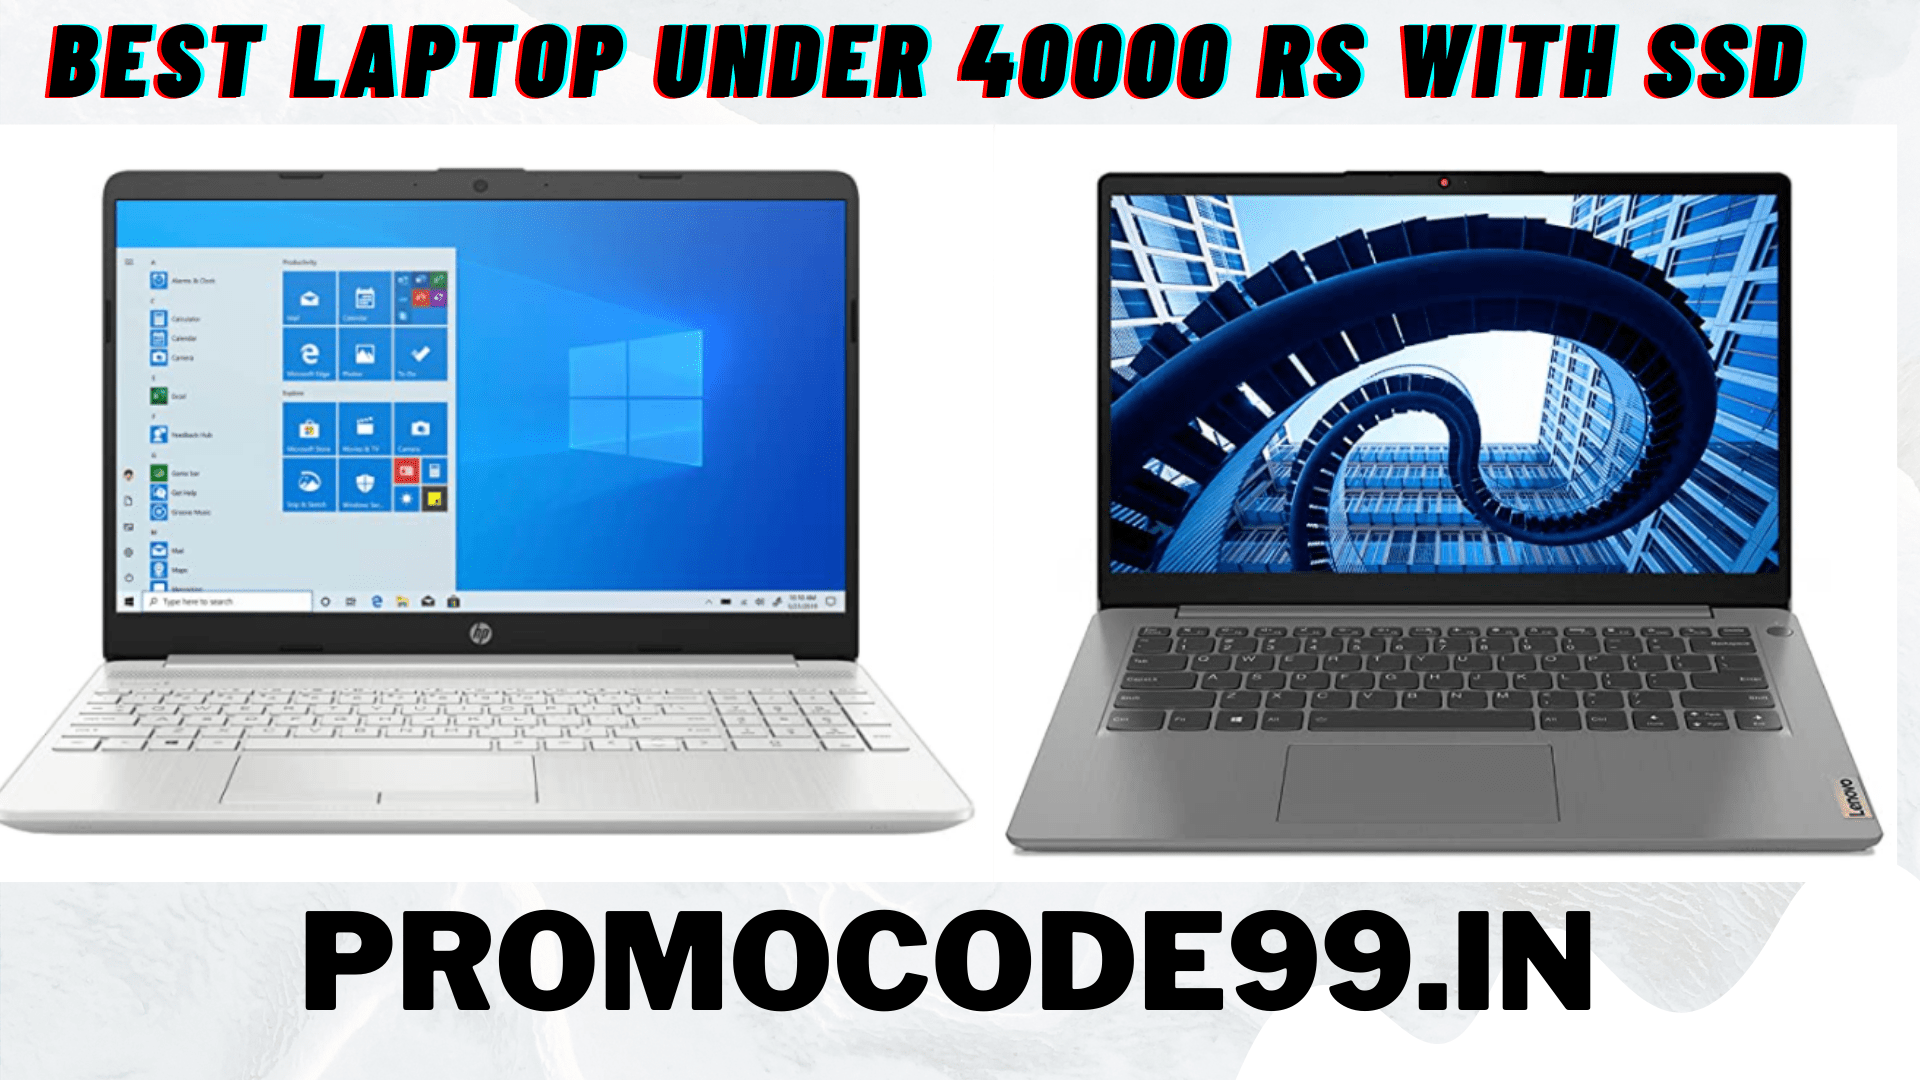 Best Laptop under Rs 40000 With SSD